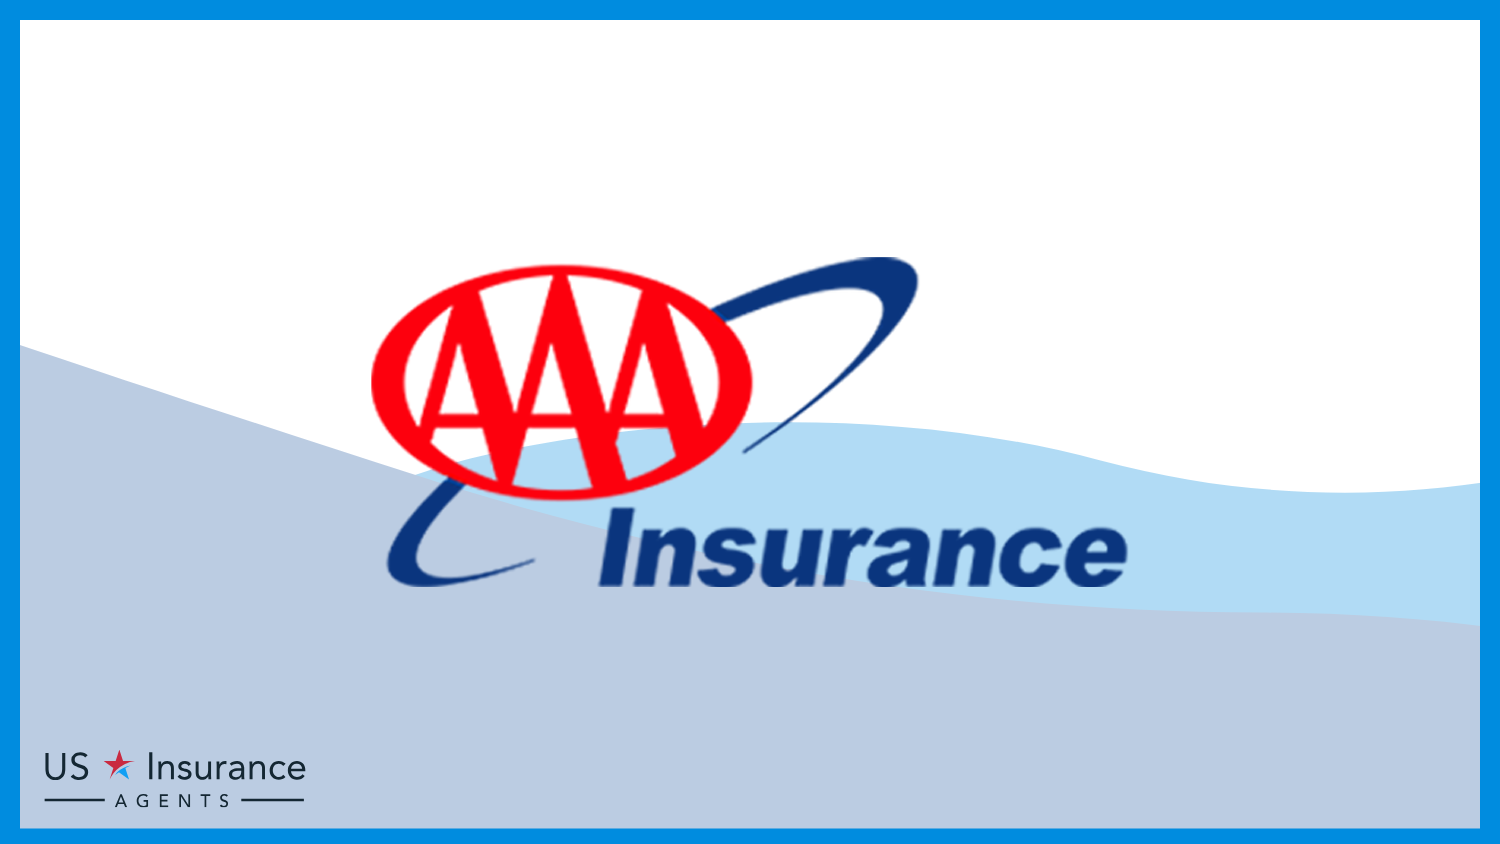 AAA: Best Business Insurance for Tanning Salons